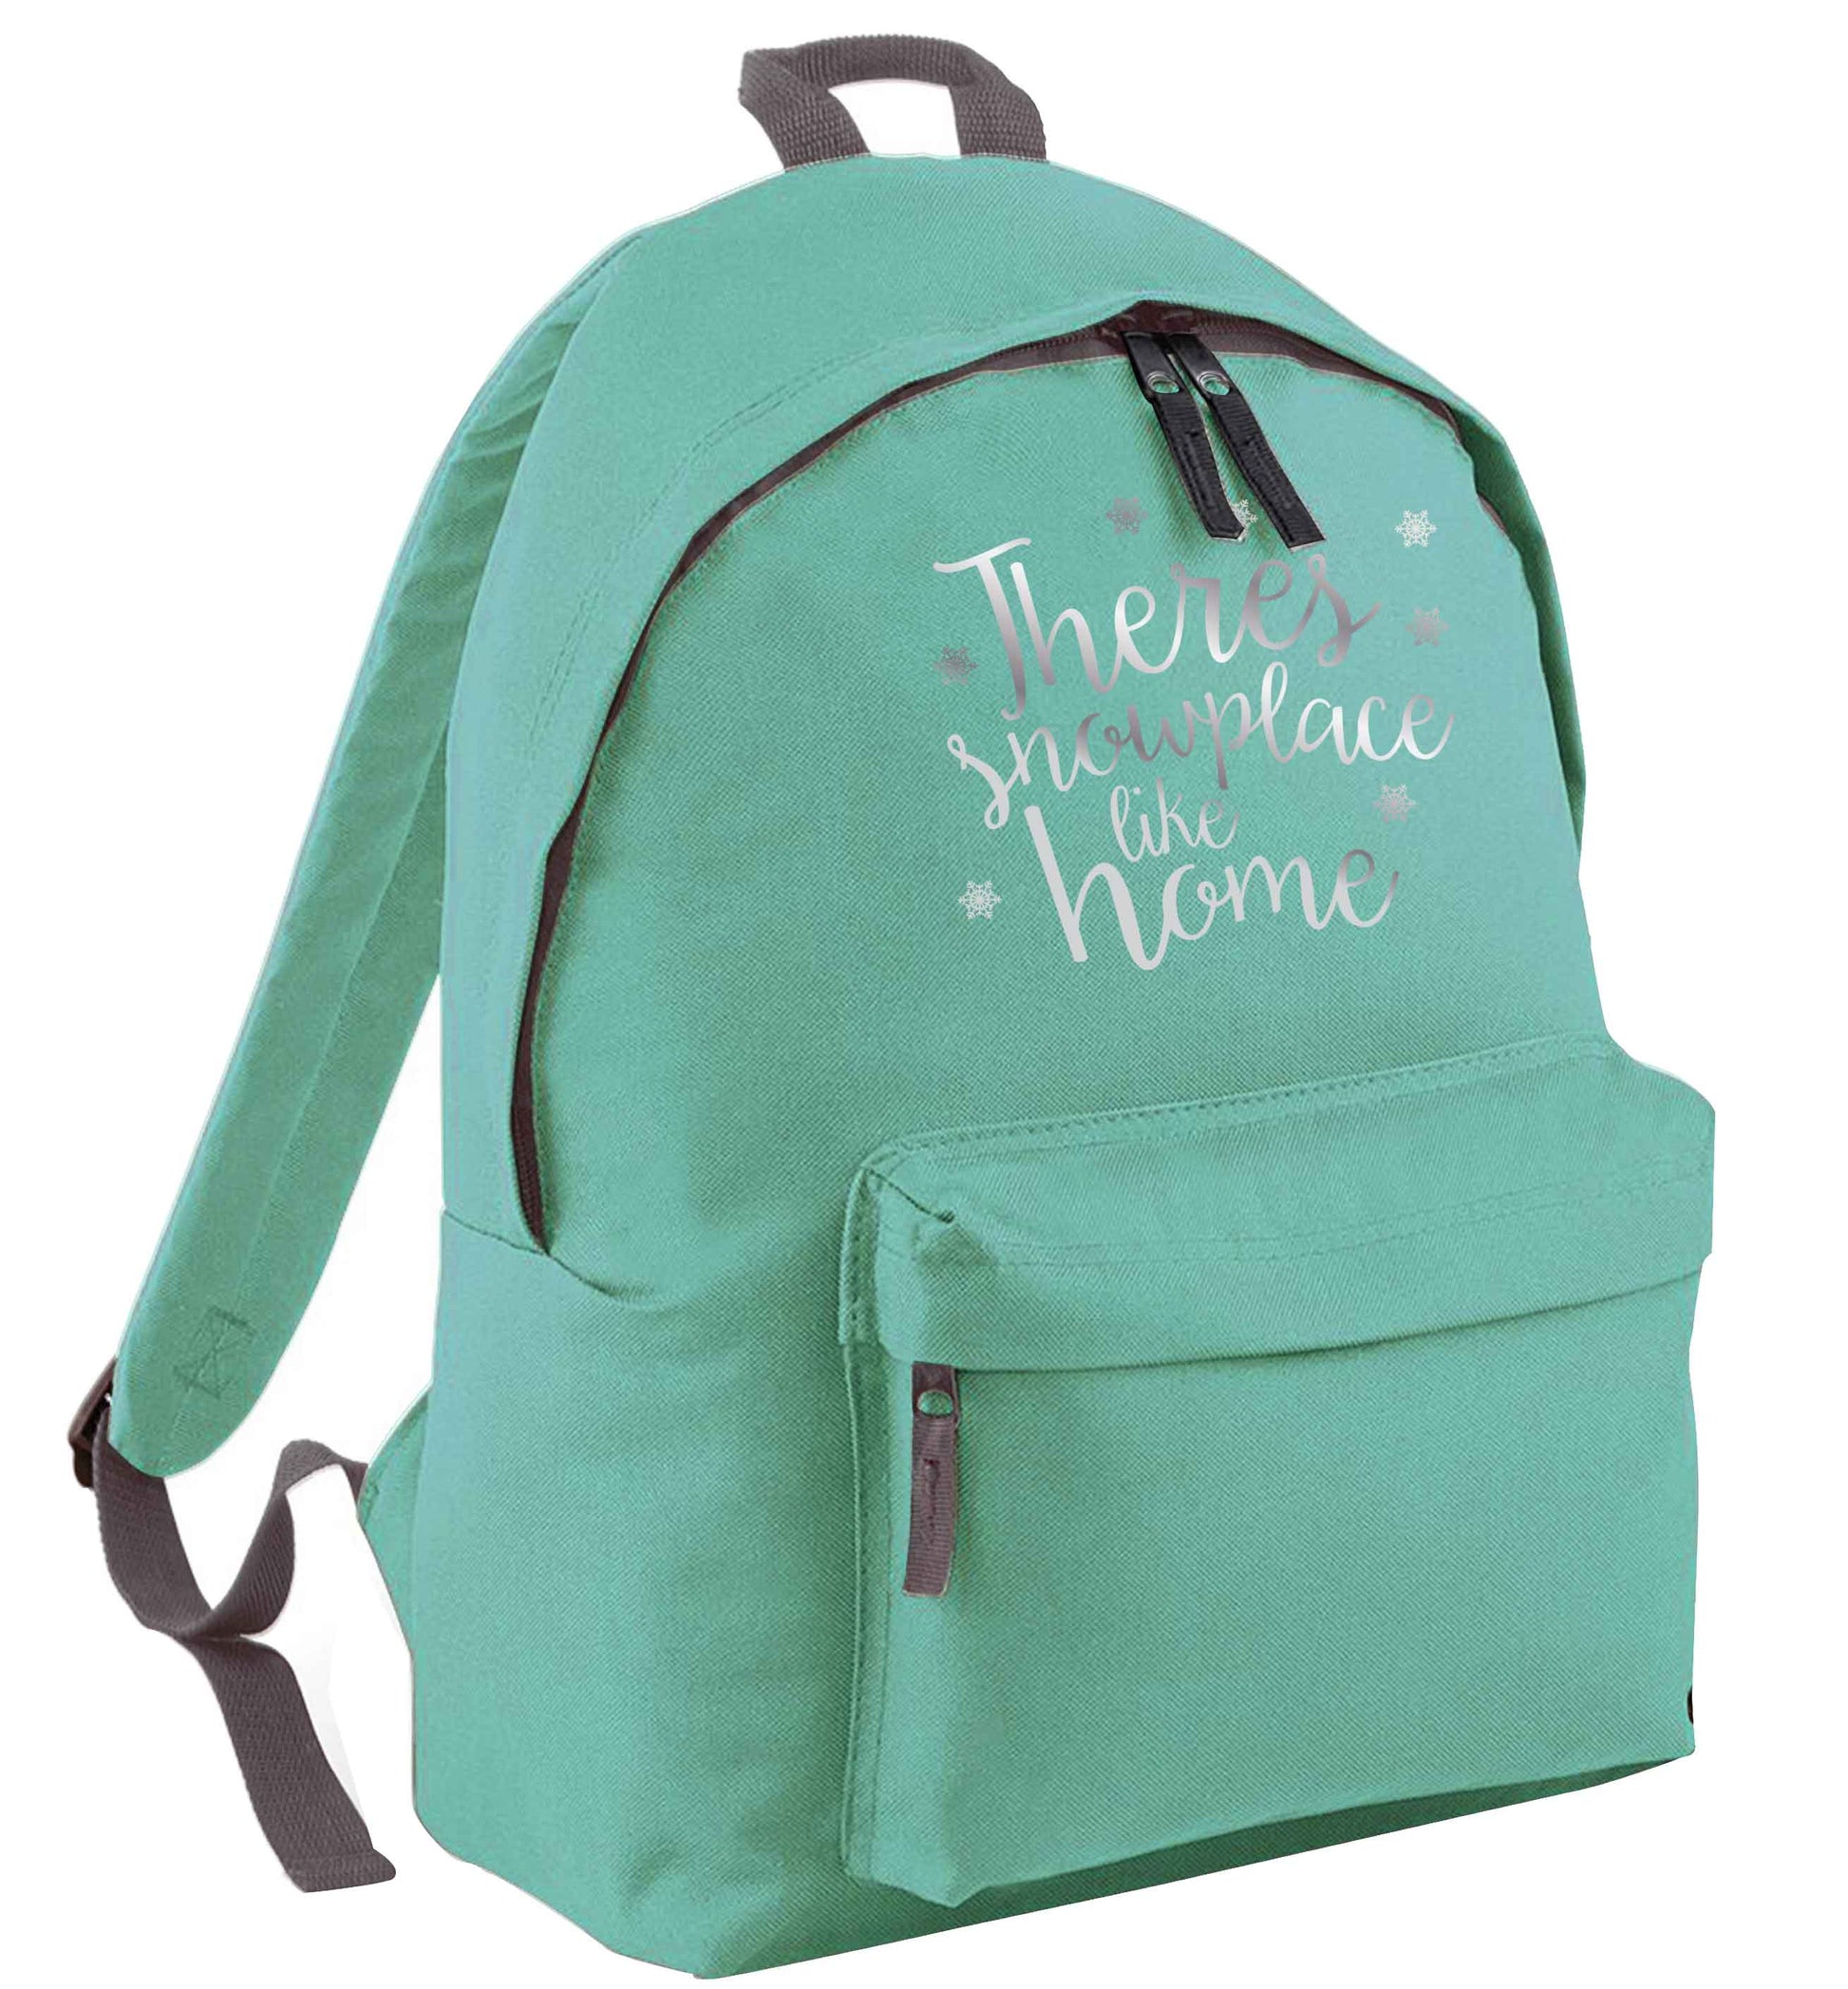 There's snowplace like home - metallic silver mint adults backpack